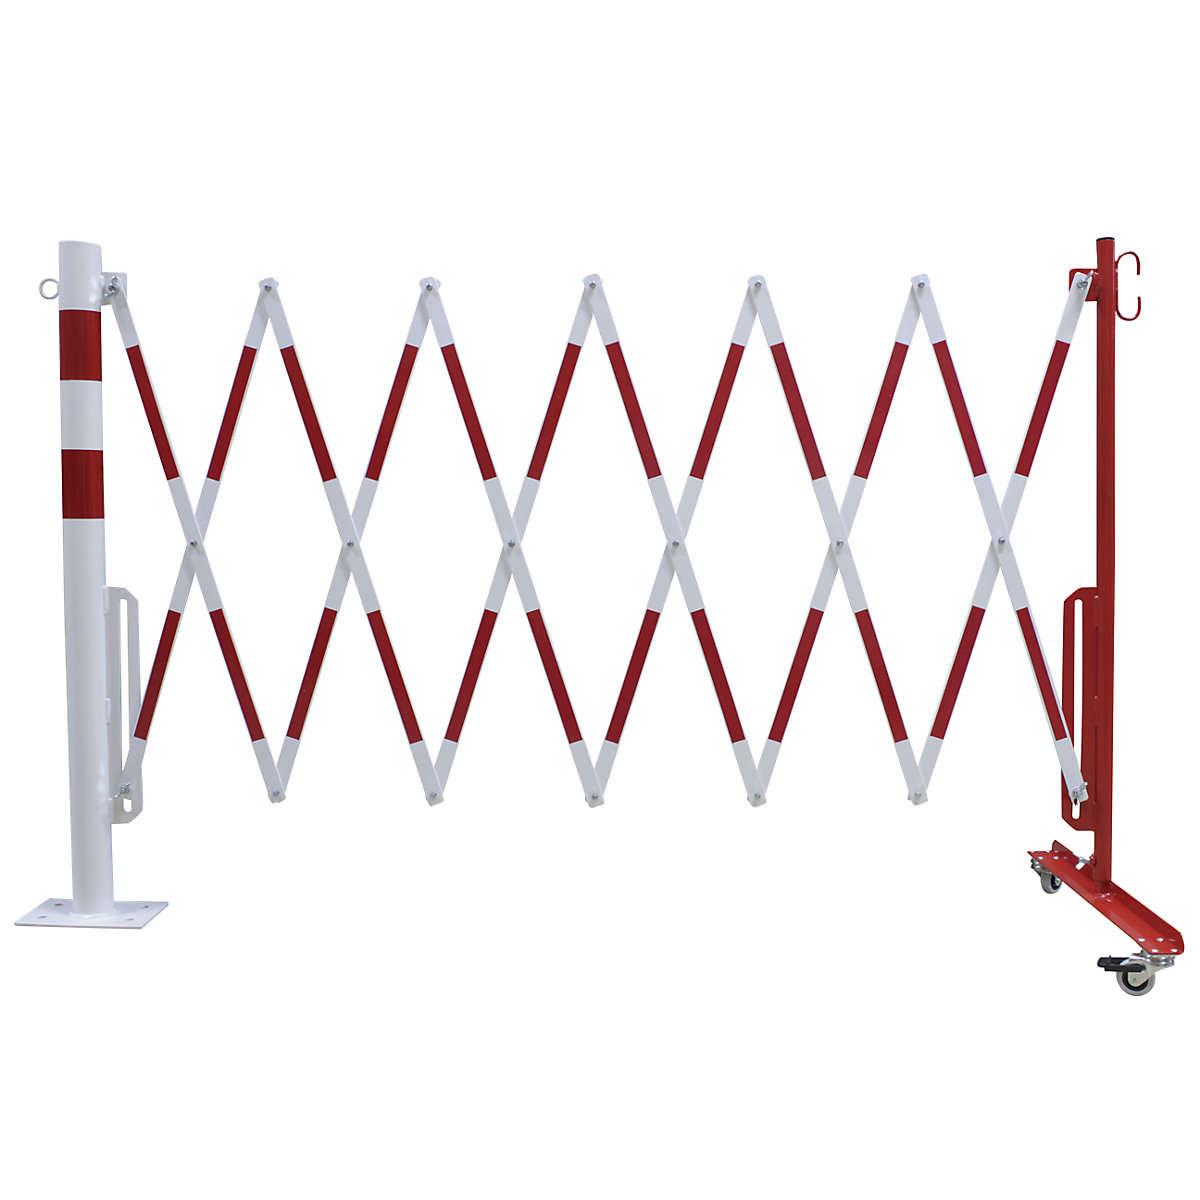 Barrier post with expanding barrier